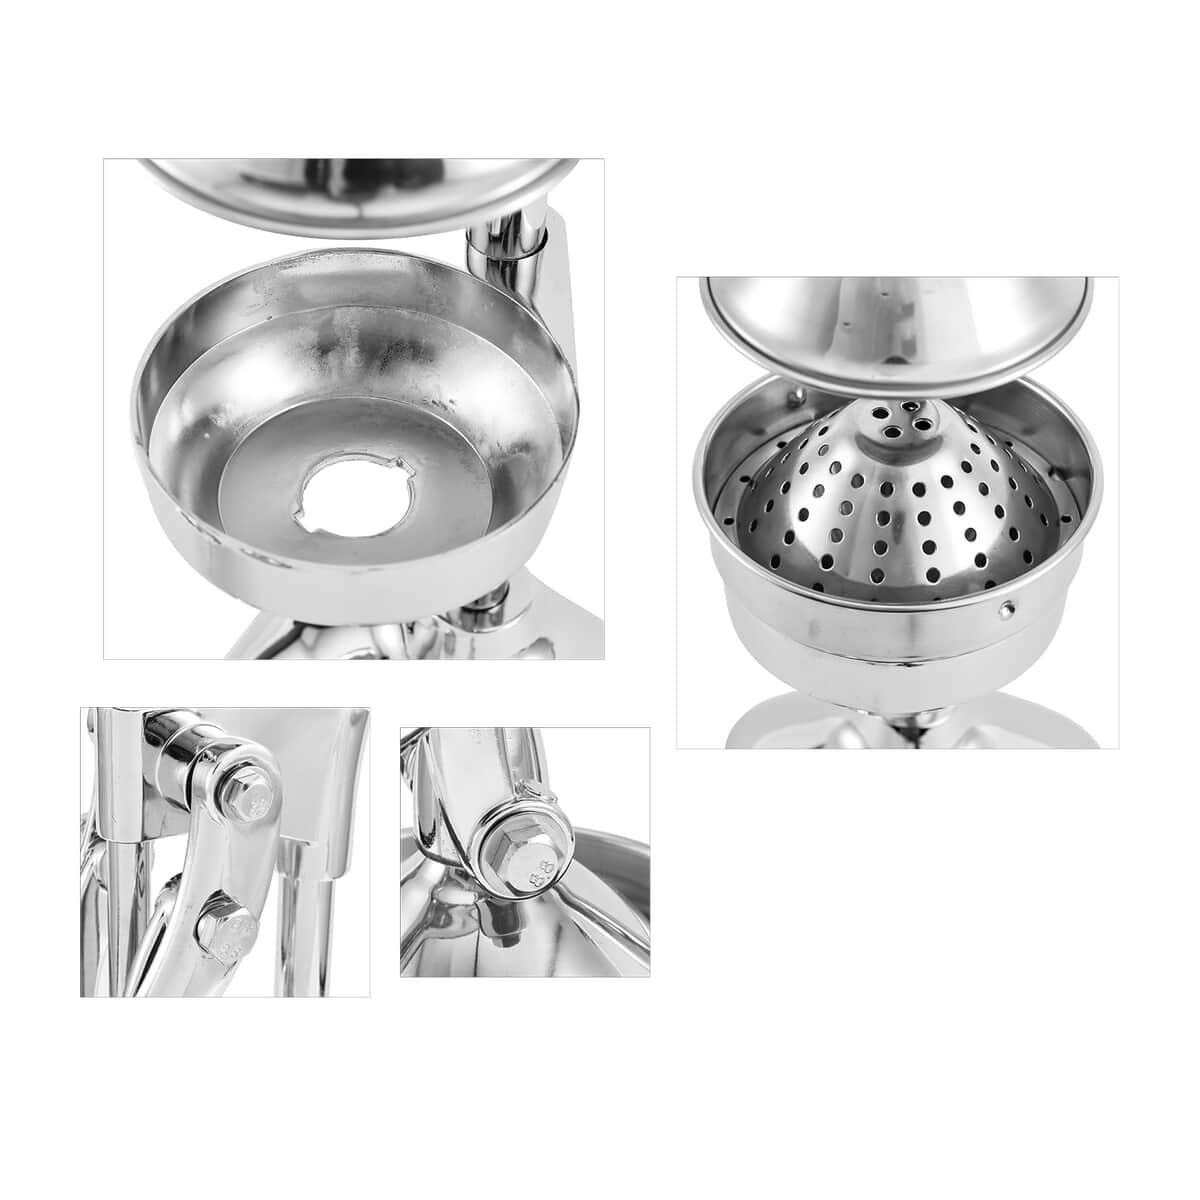 Homesmart Stainless Steel and Aluminum Hand Press Citrus Fruits and Vegetable Juicer image number 5